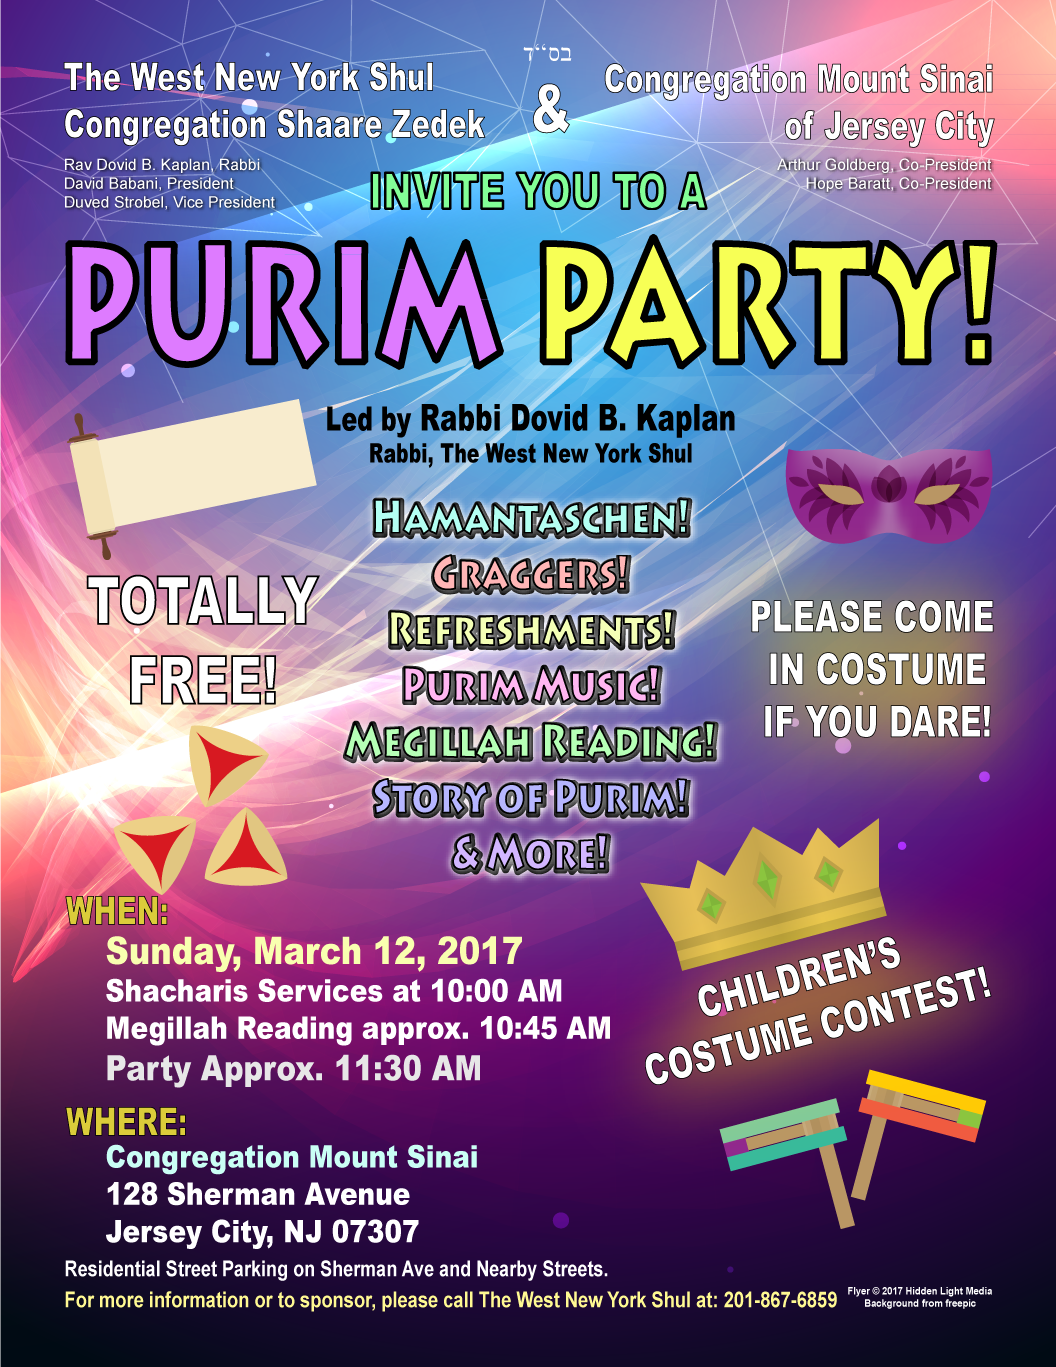 The West New York Shul PURIM PARTY!